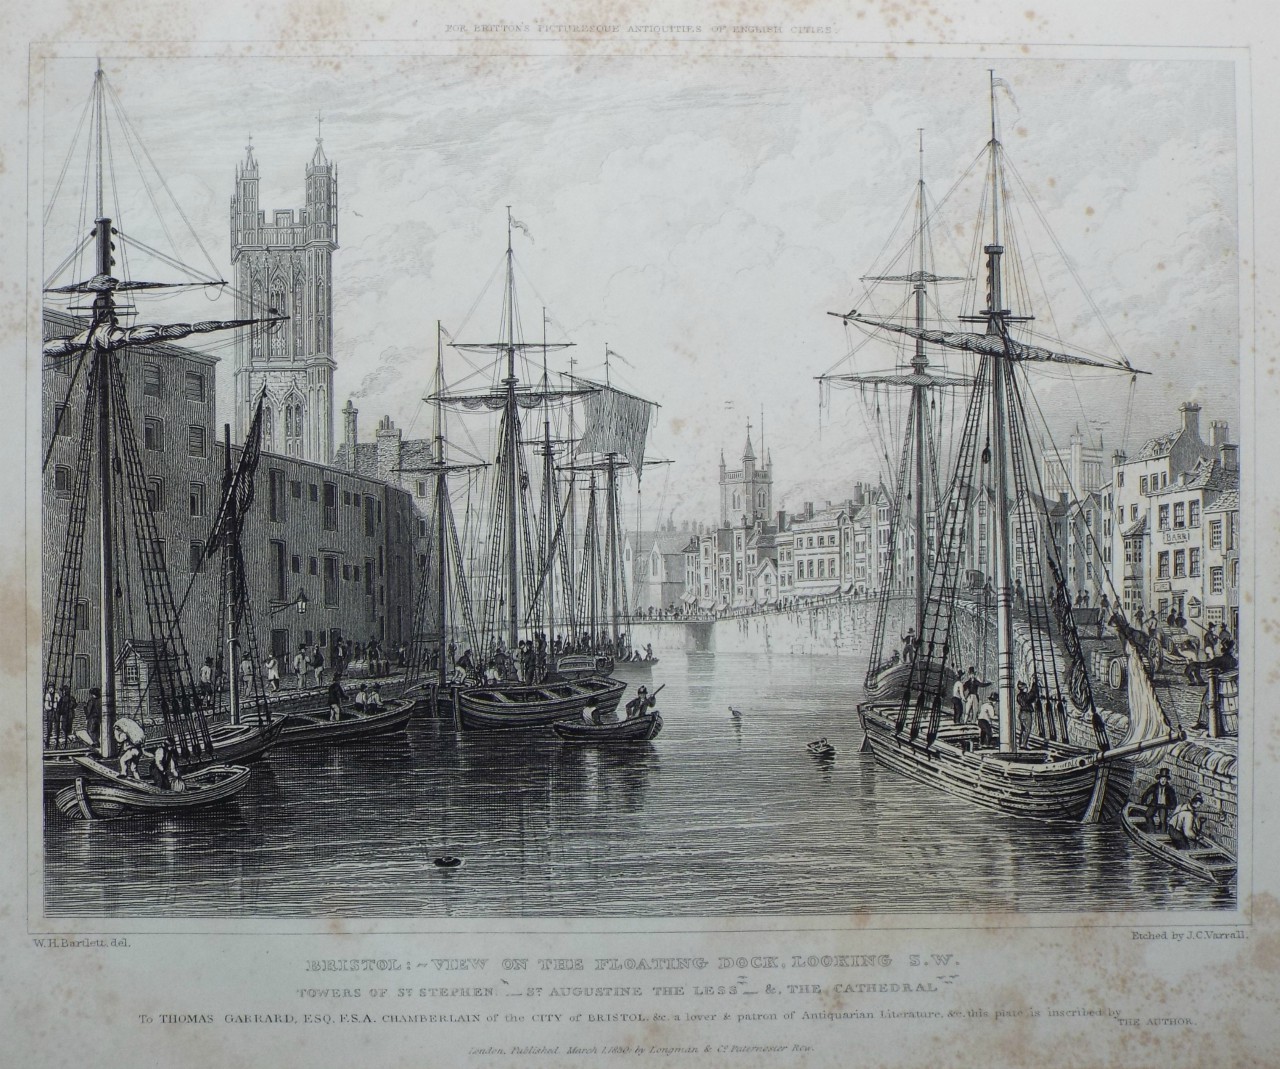 Print - Bristol: View of the Floating Dock, looking S.W. Towers of St. Stephen, St. Augustine the Less & the Cathedral. - Varrall